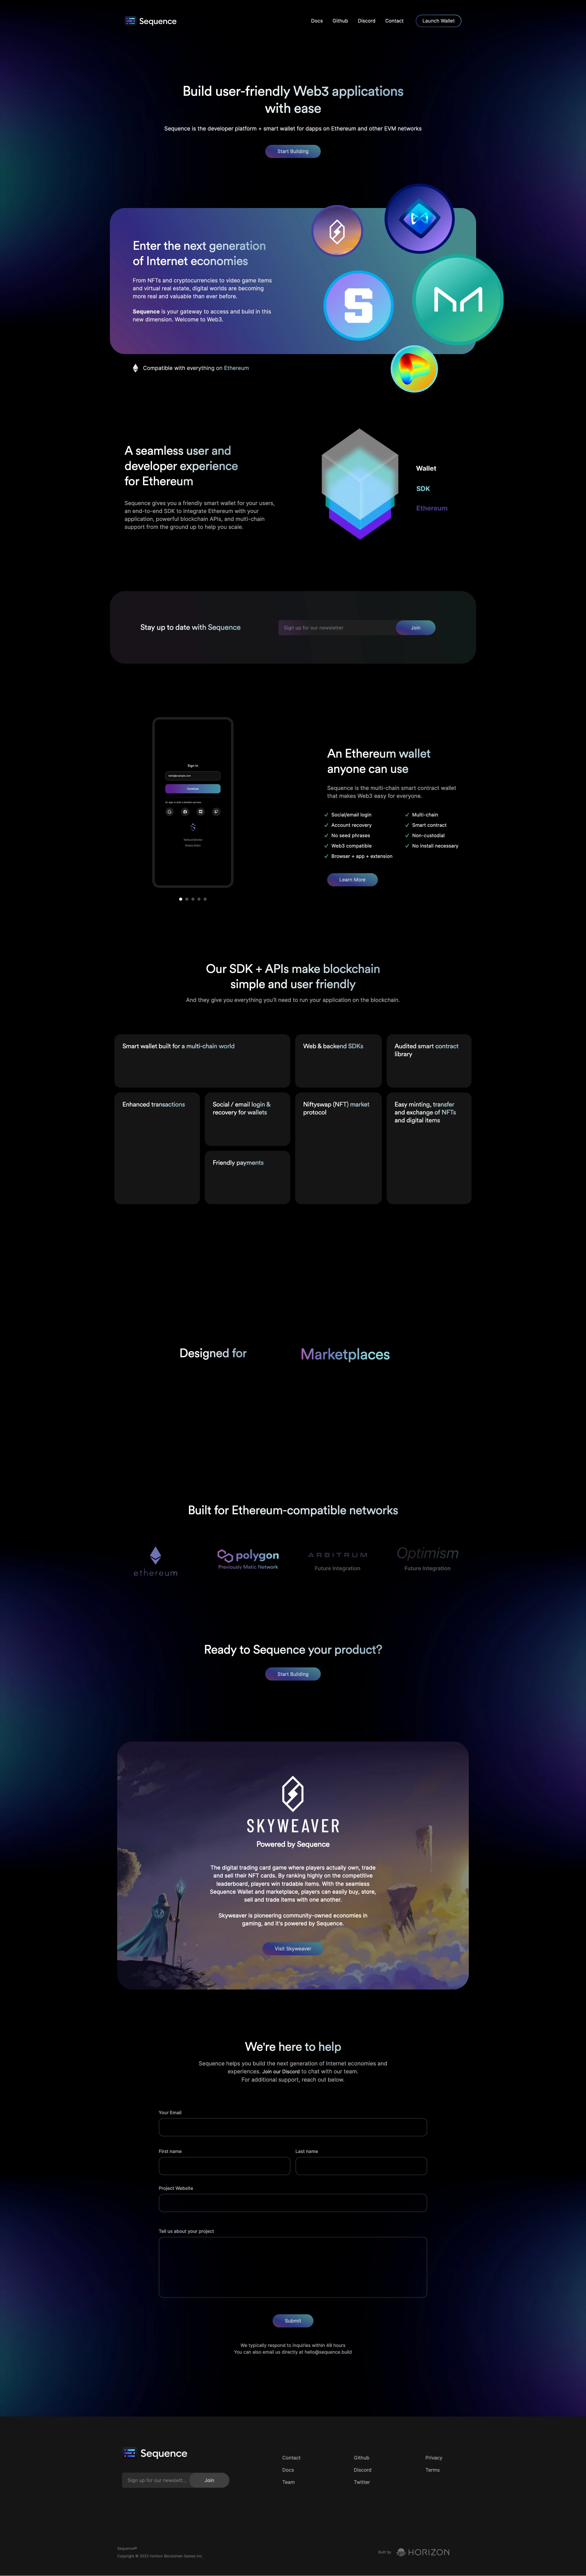 Sequence Landing Page Example: Build user-friendly Web3 applications with ease. Sequence is the developer platform + smart wallet for dapps on Ethereum and other EVM networks.